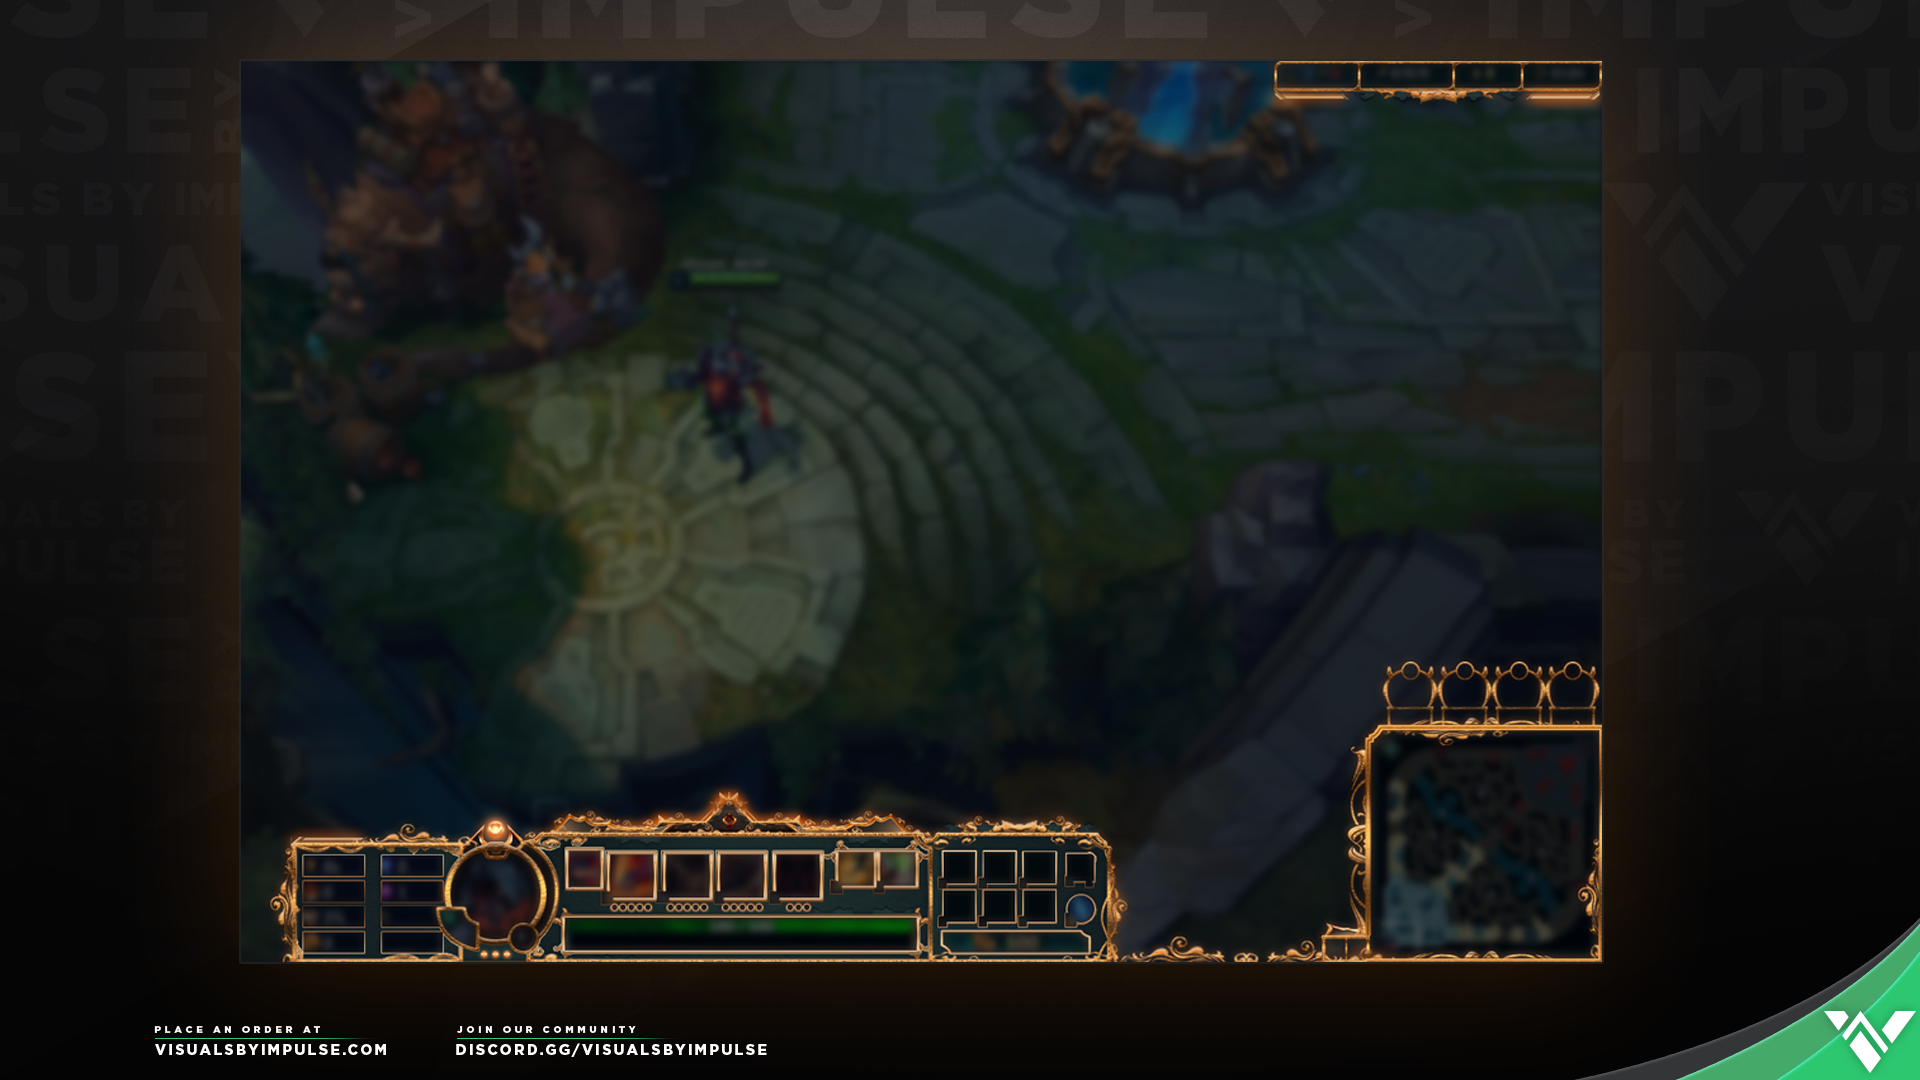 'Royal LoL' Stream Overlay: FREE League of Legends ... - 1920 x 1080 png 1206kB